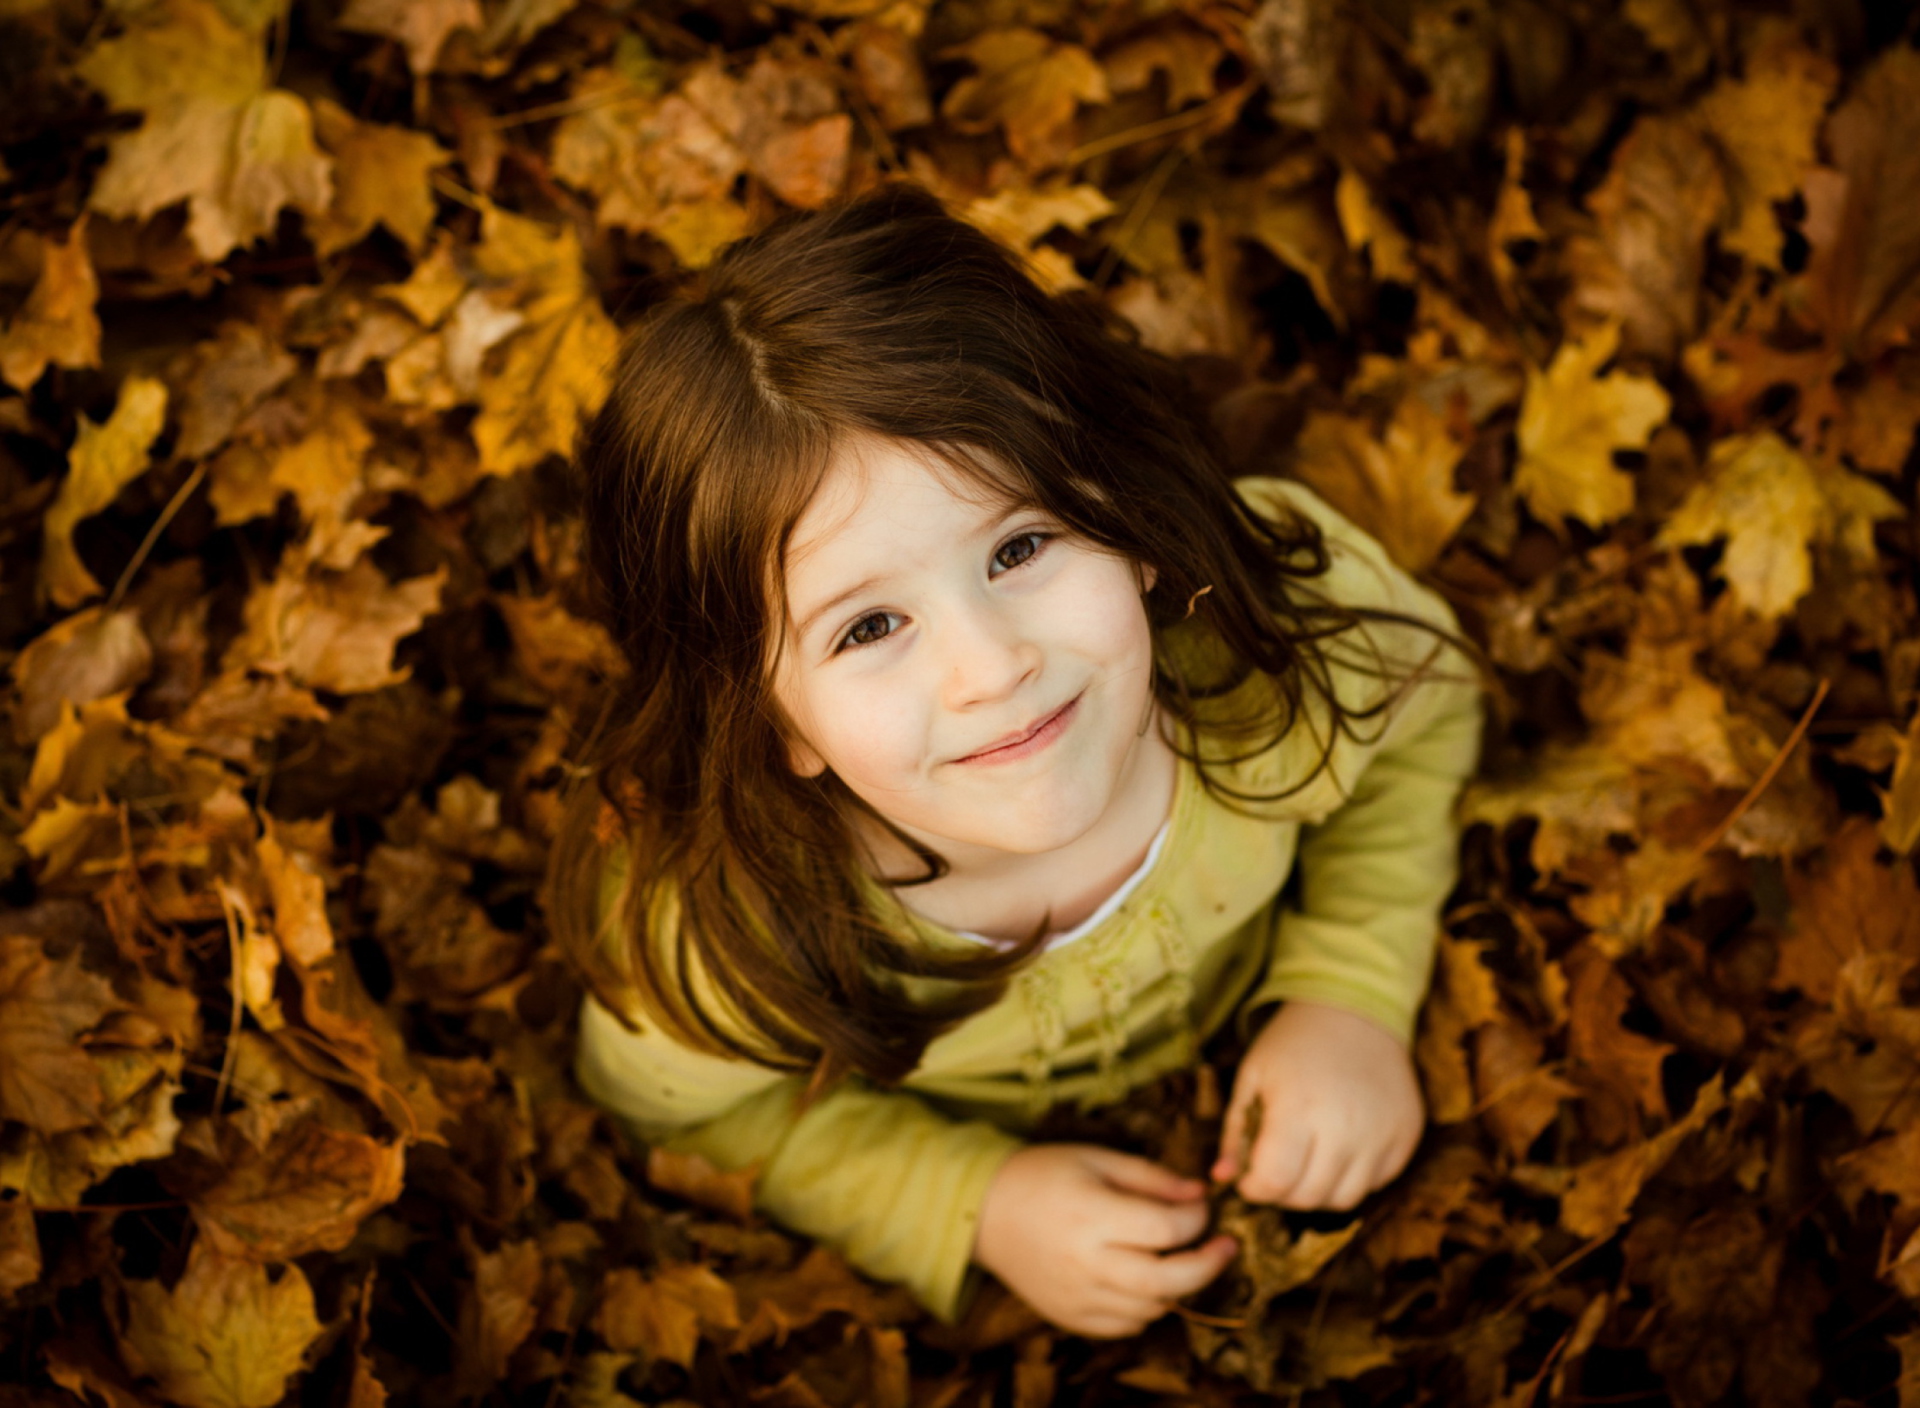 Child In Leaves wallpaper 1920x1408